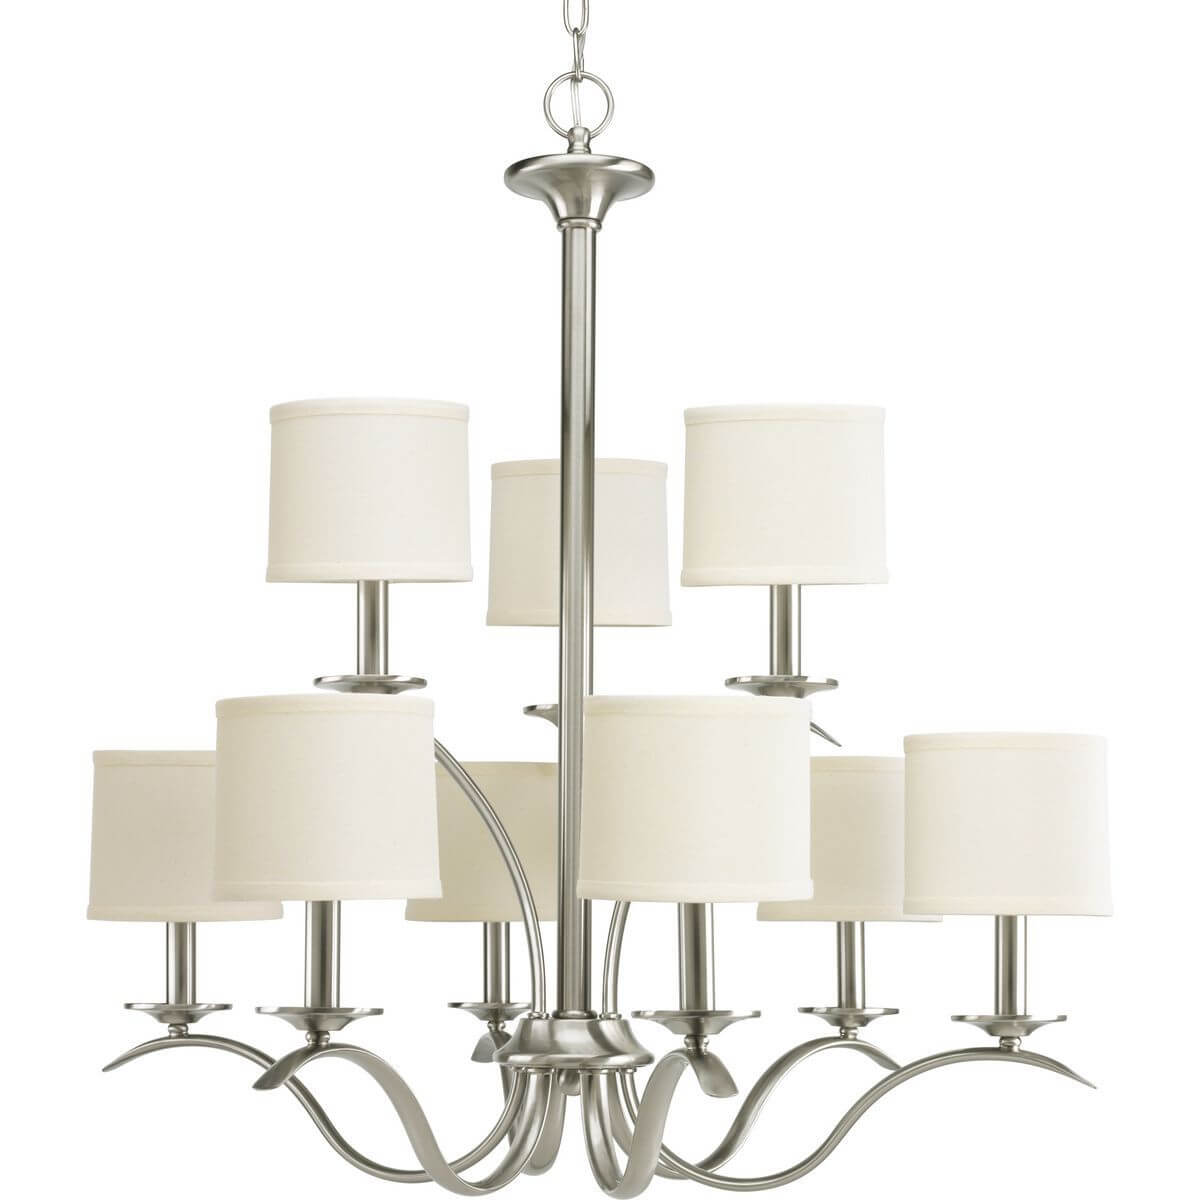 Progress Lighting Inspire 9 Light 29 inch Chandelier in Brushed Nickel with Off White Linen Drum Shades P4638-09